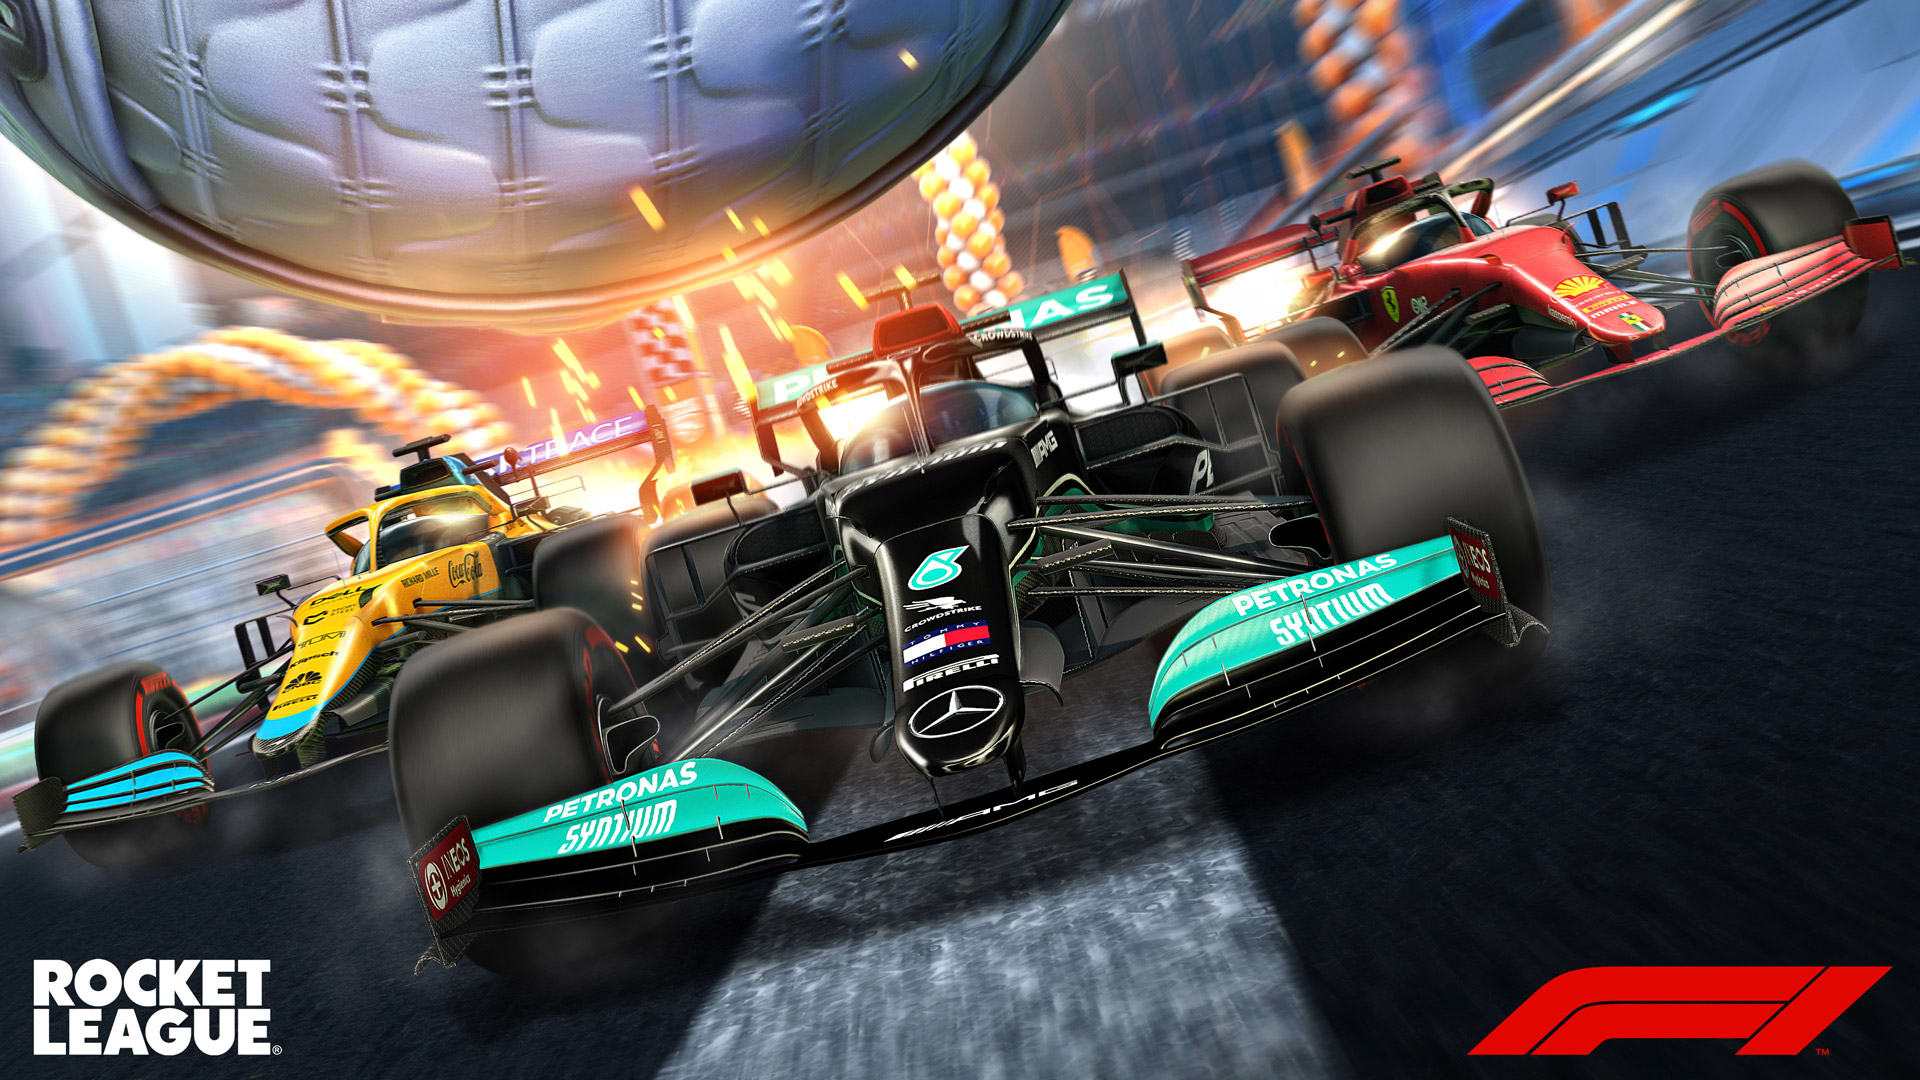 F1 cars and liveries to be featured in Rocket League in new multi-year  partnership